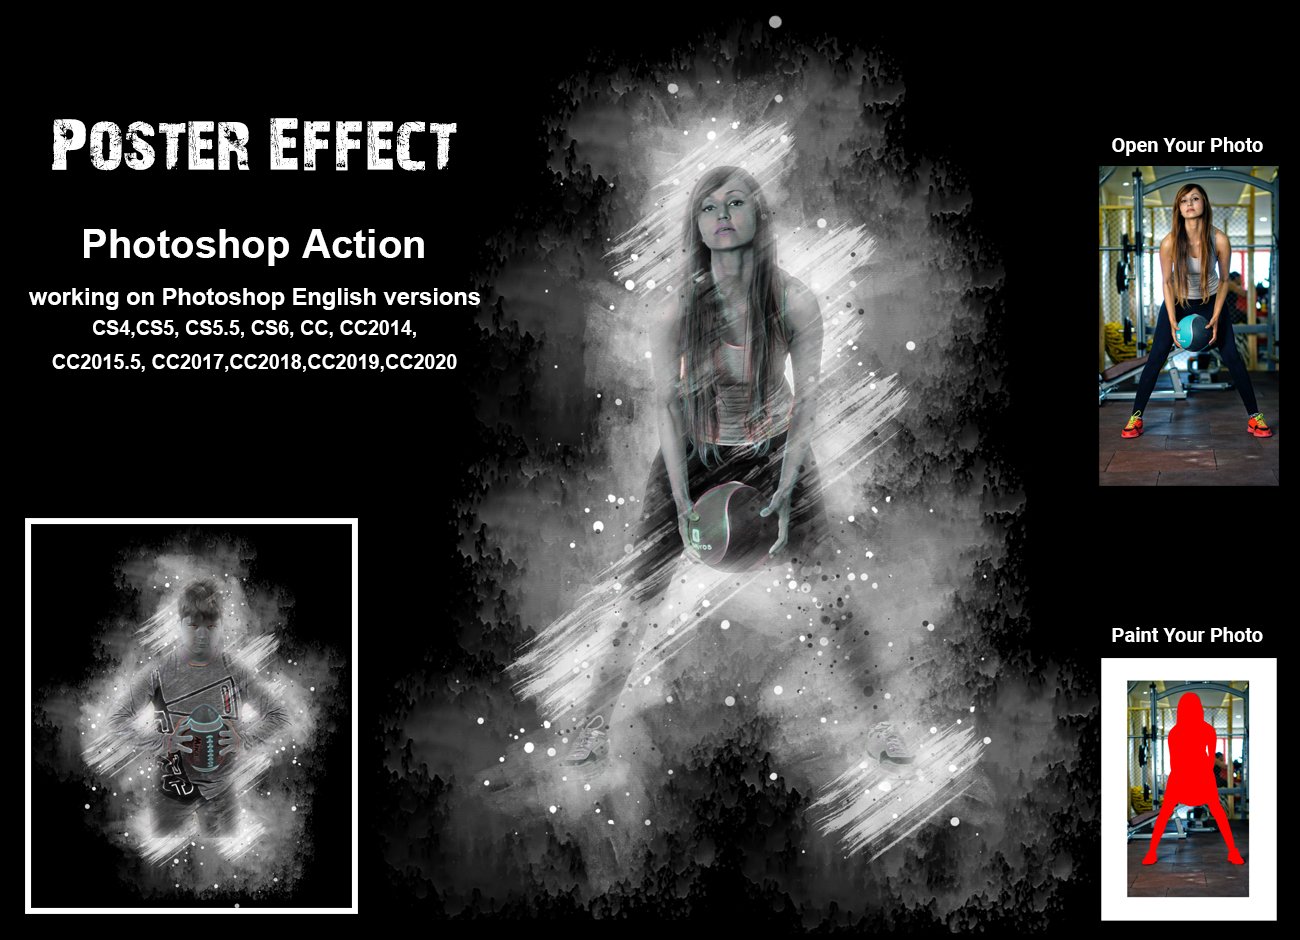 Poster Effect Photoshop Actioncover image.